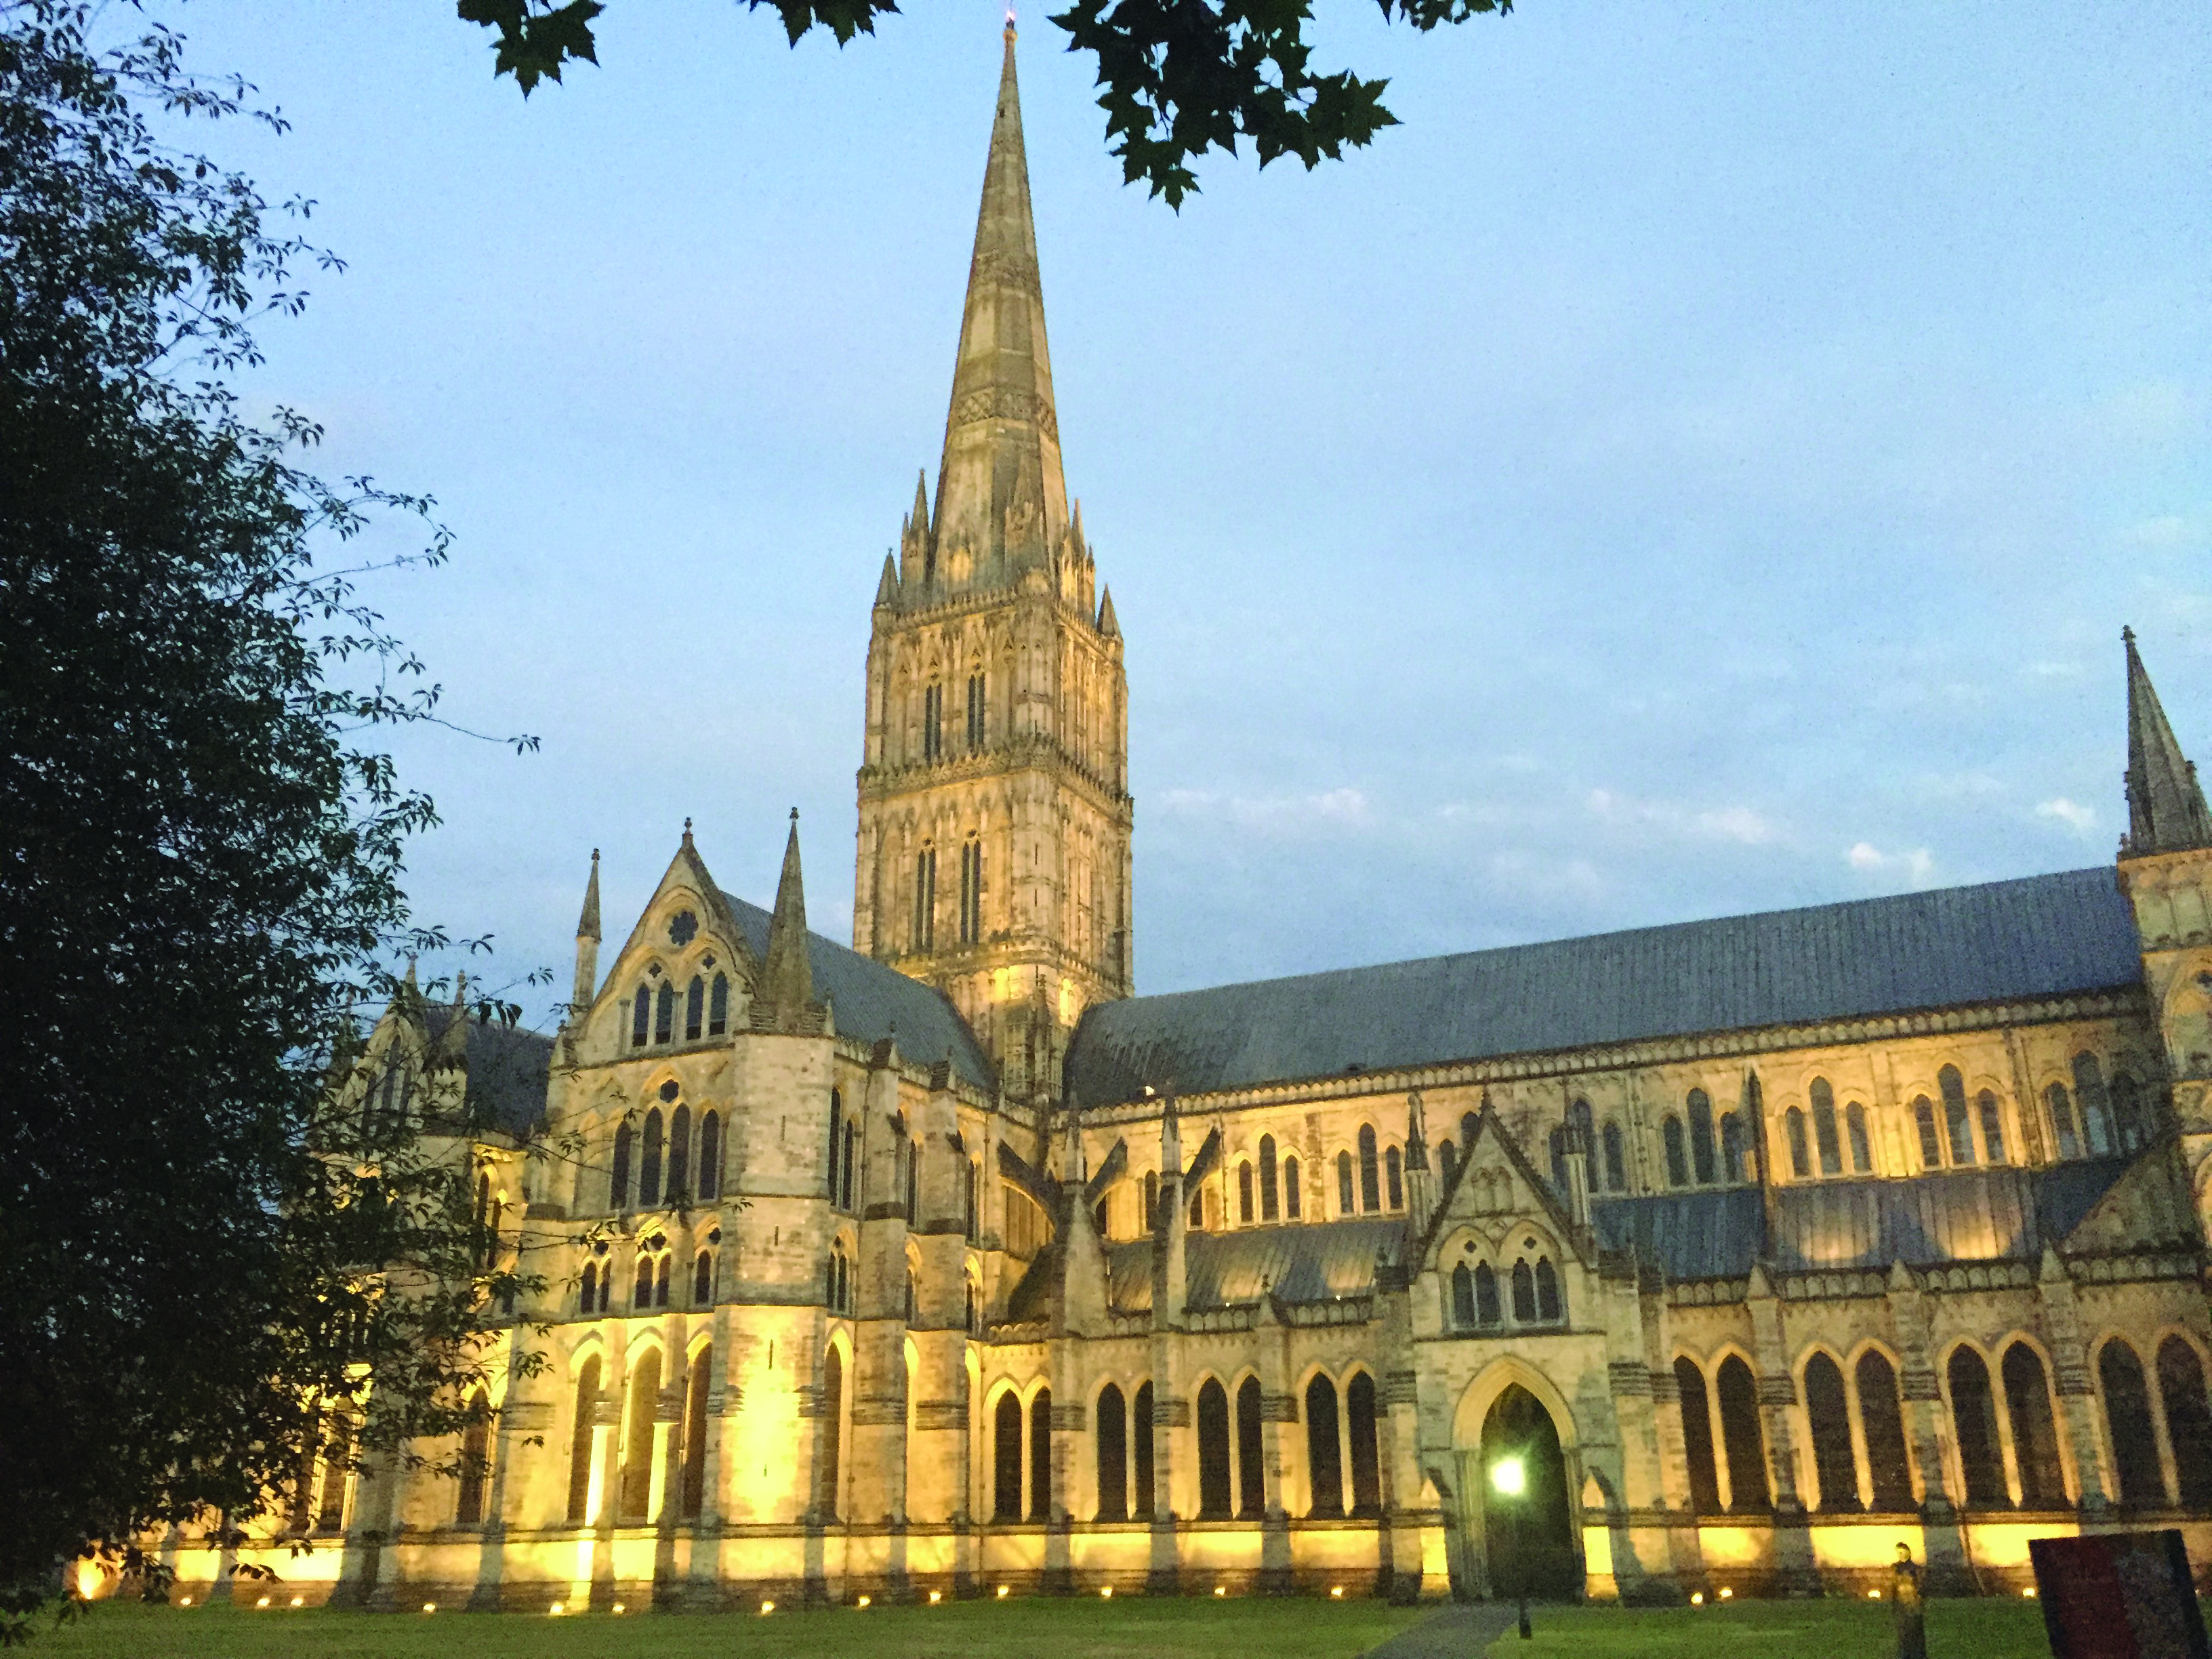 Salisbury Cathedral at dusk. This glorious church was built in just 38 years, from 1220 to 1258.